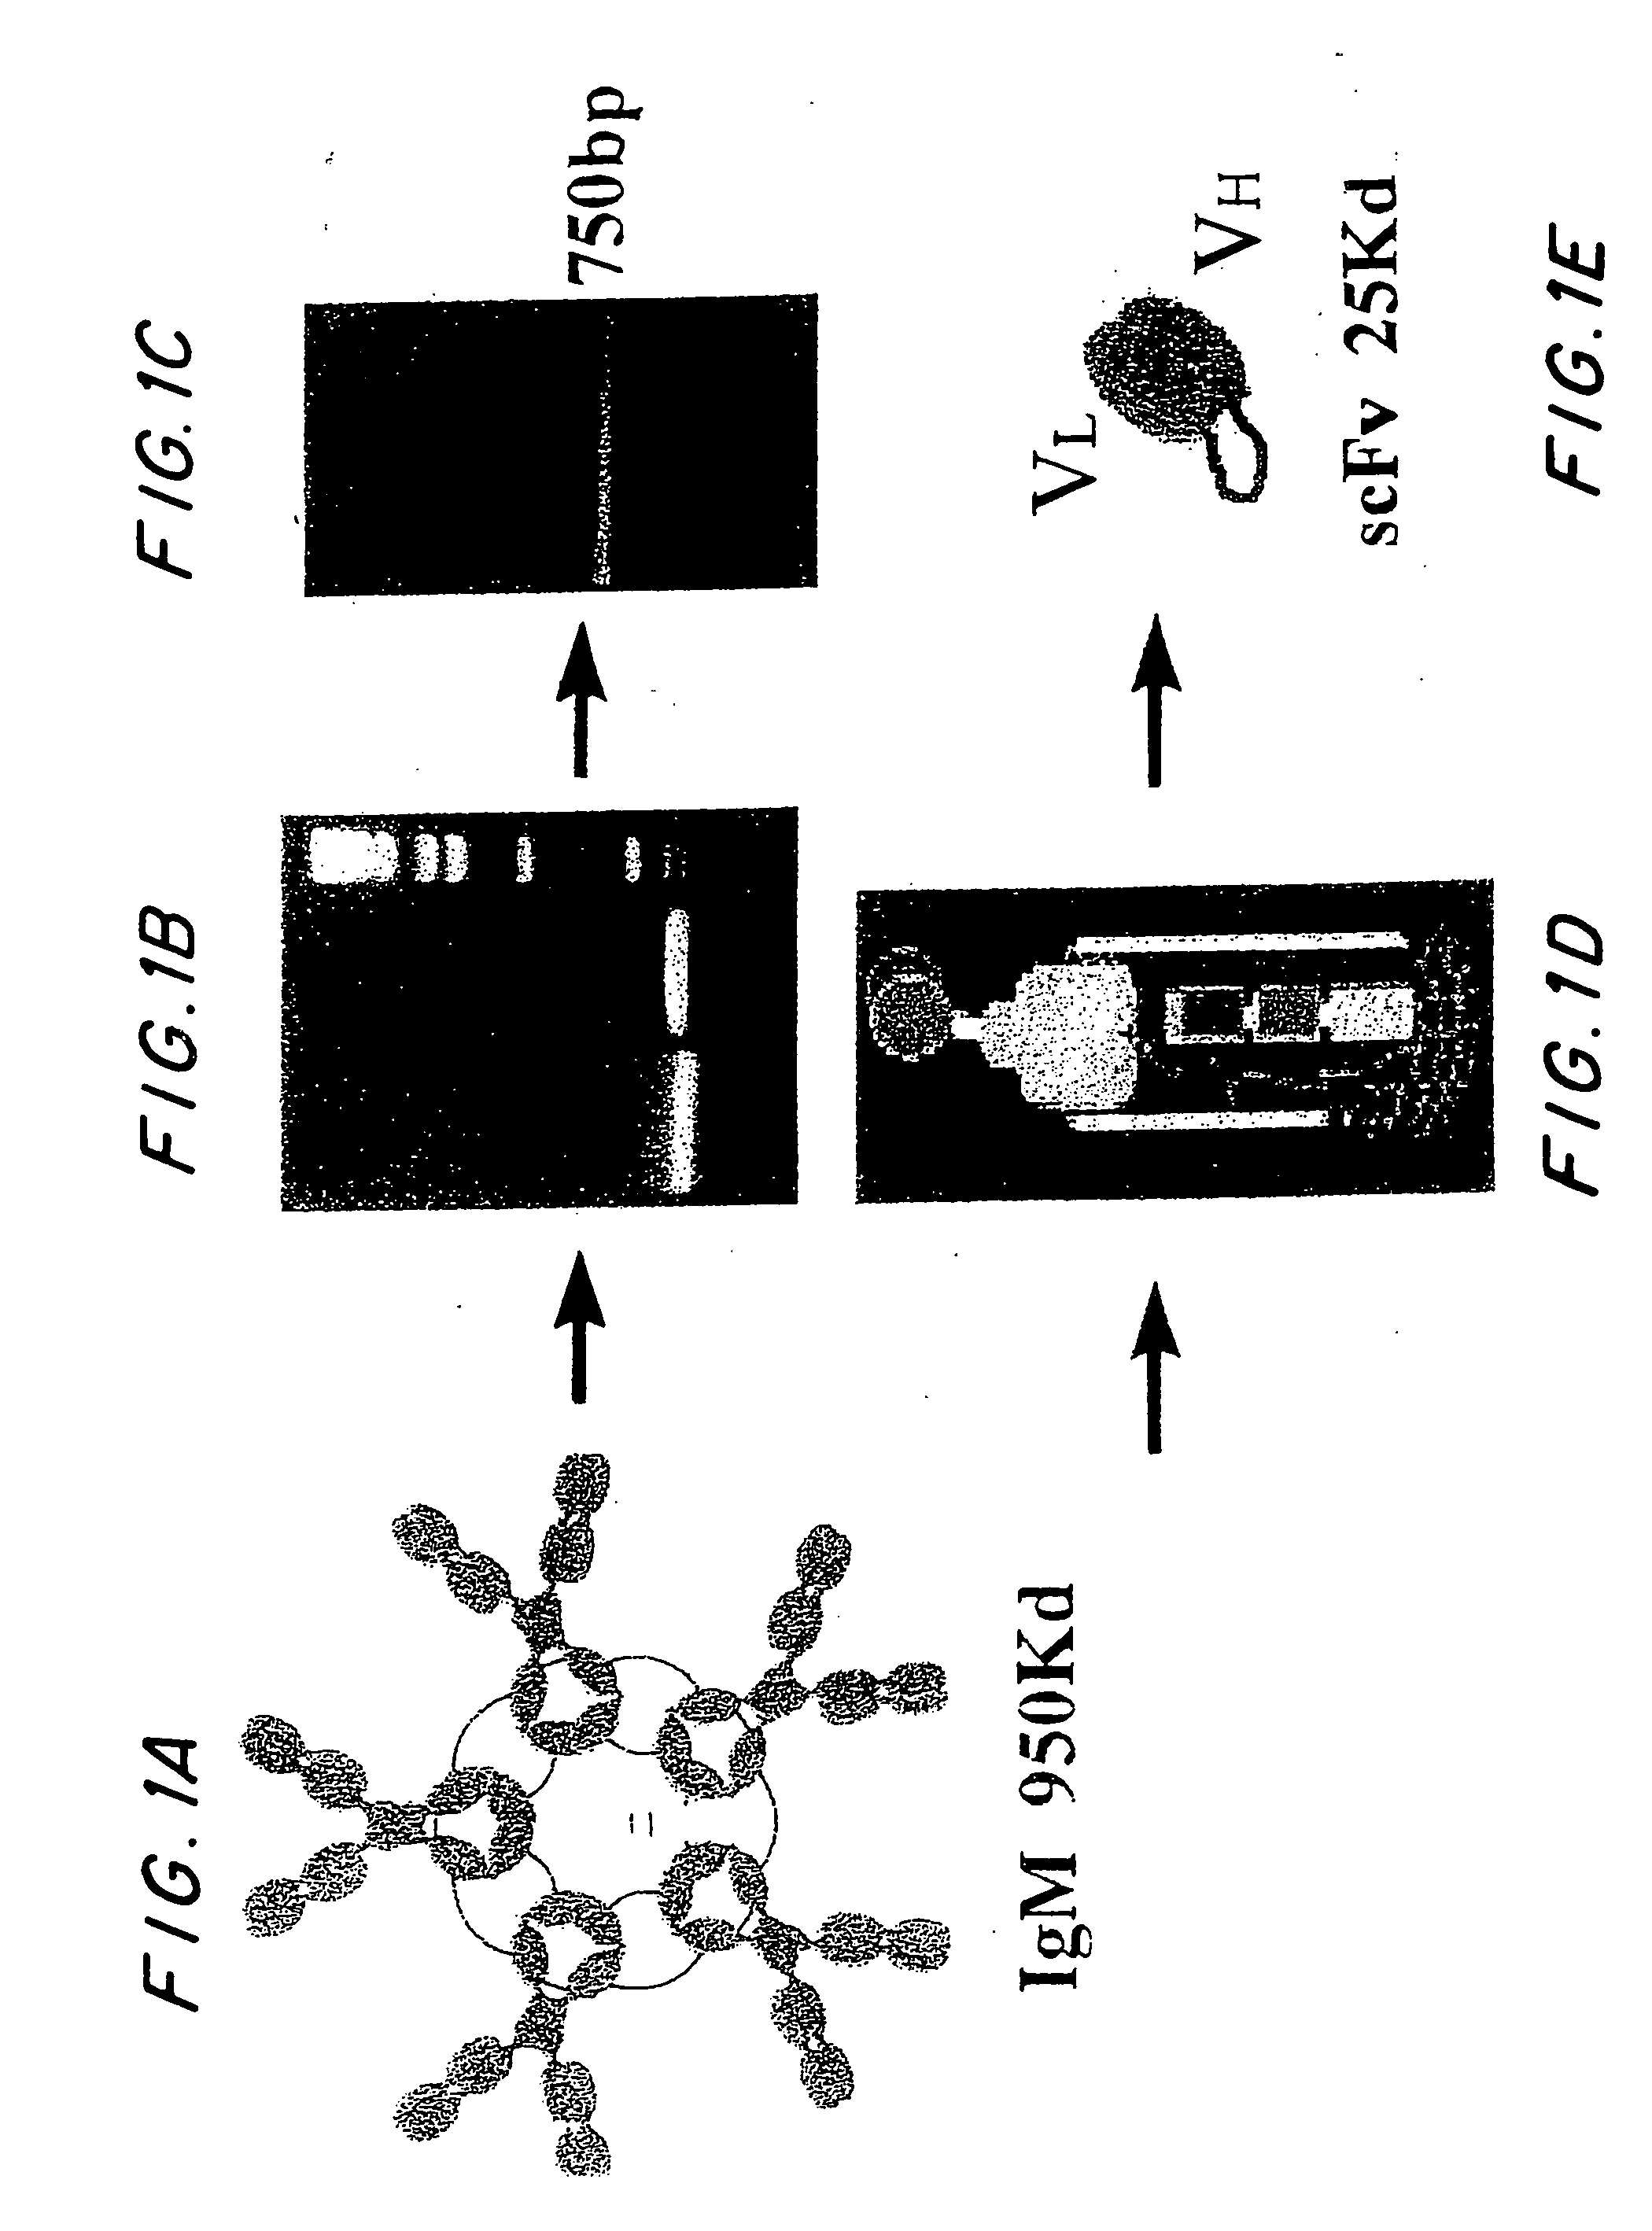 Agents and compositions and methods utilizing same useful in diagnosing and/or treating or preventing plaque forming diseases